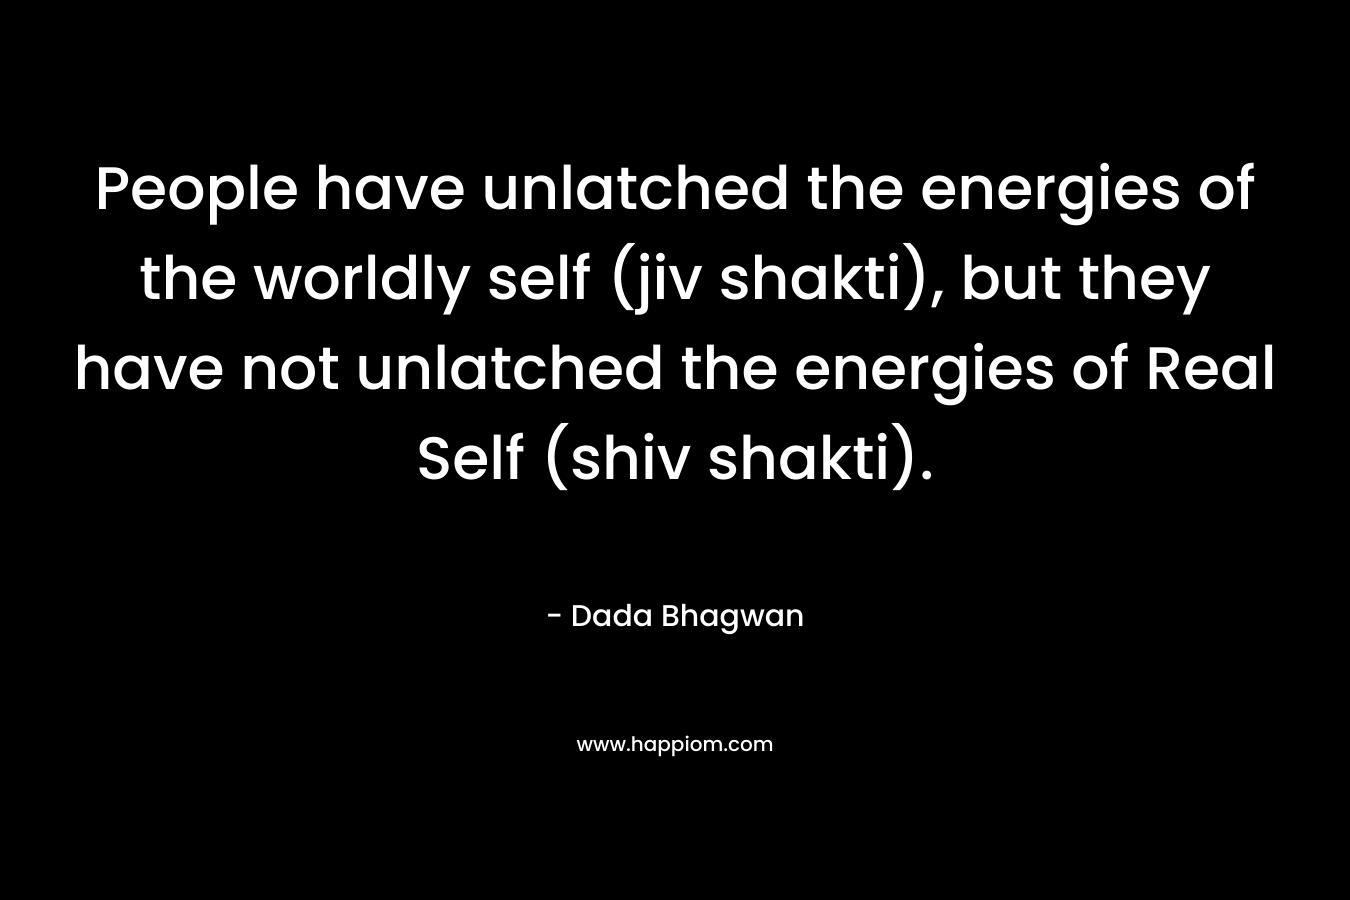 People have unlatched the energies of the worldly self (jiv shakti), but they have not unlatched the energies of Real Self (shiv shakti).